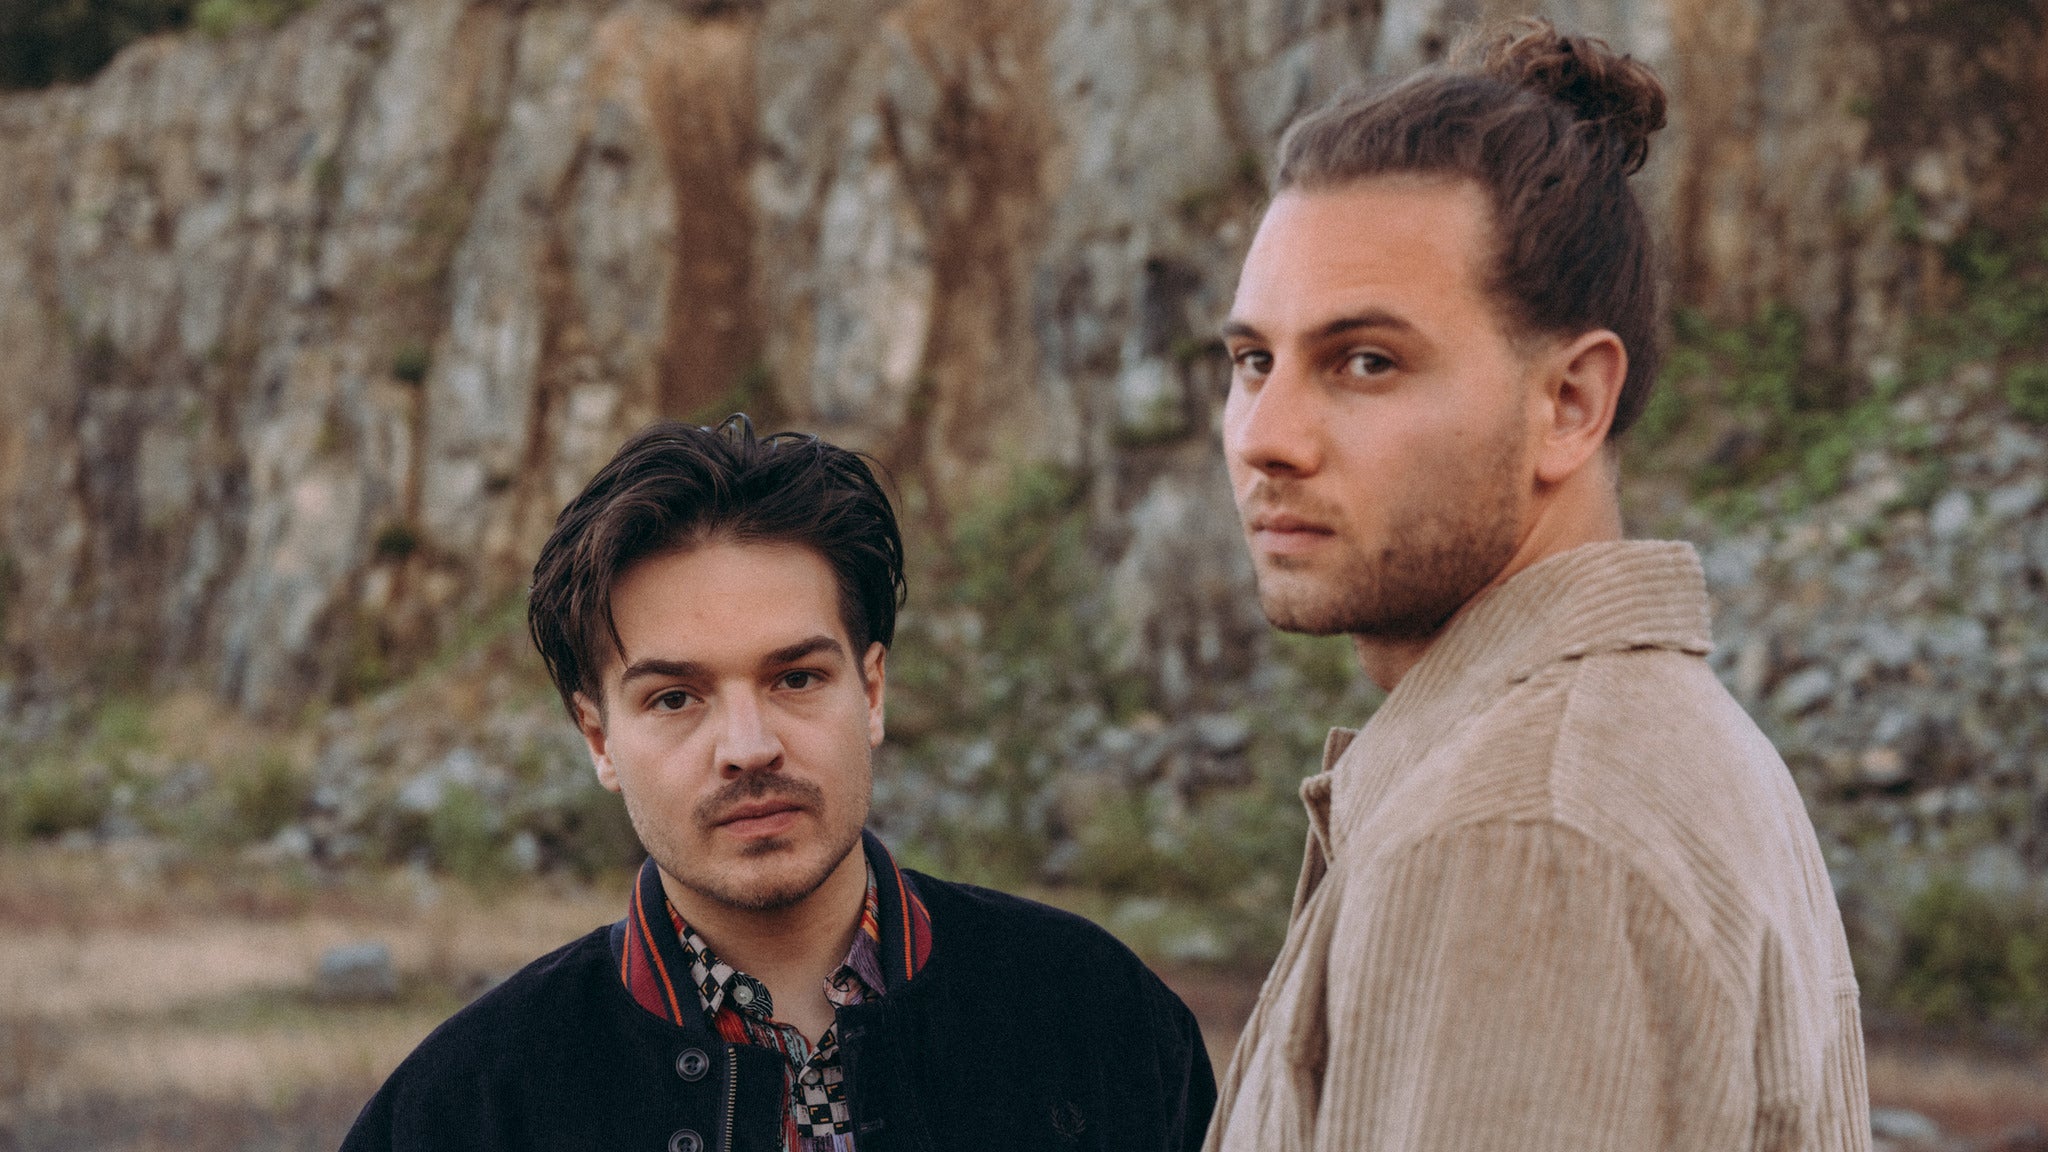 SiriusXM Alt Nation Presents MILKY CHANCE: BLOSSOM TOUR in Vancouver promo photo for Spotify presale offer code